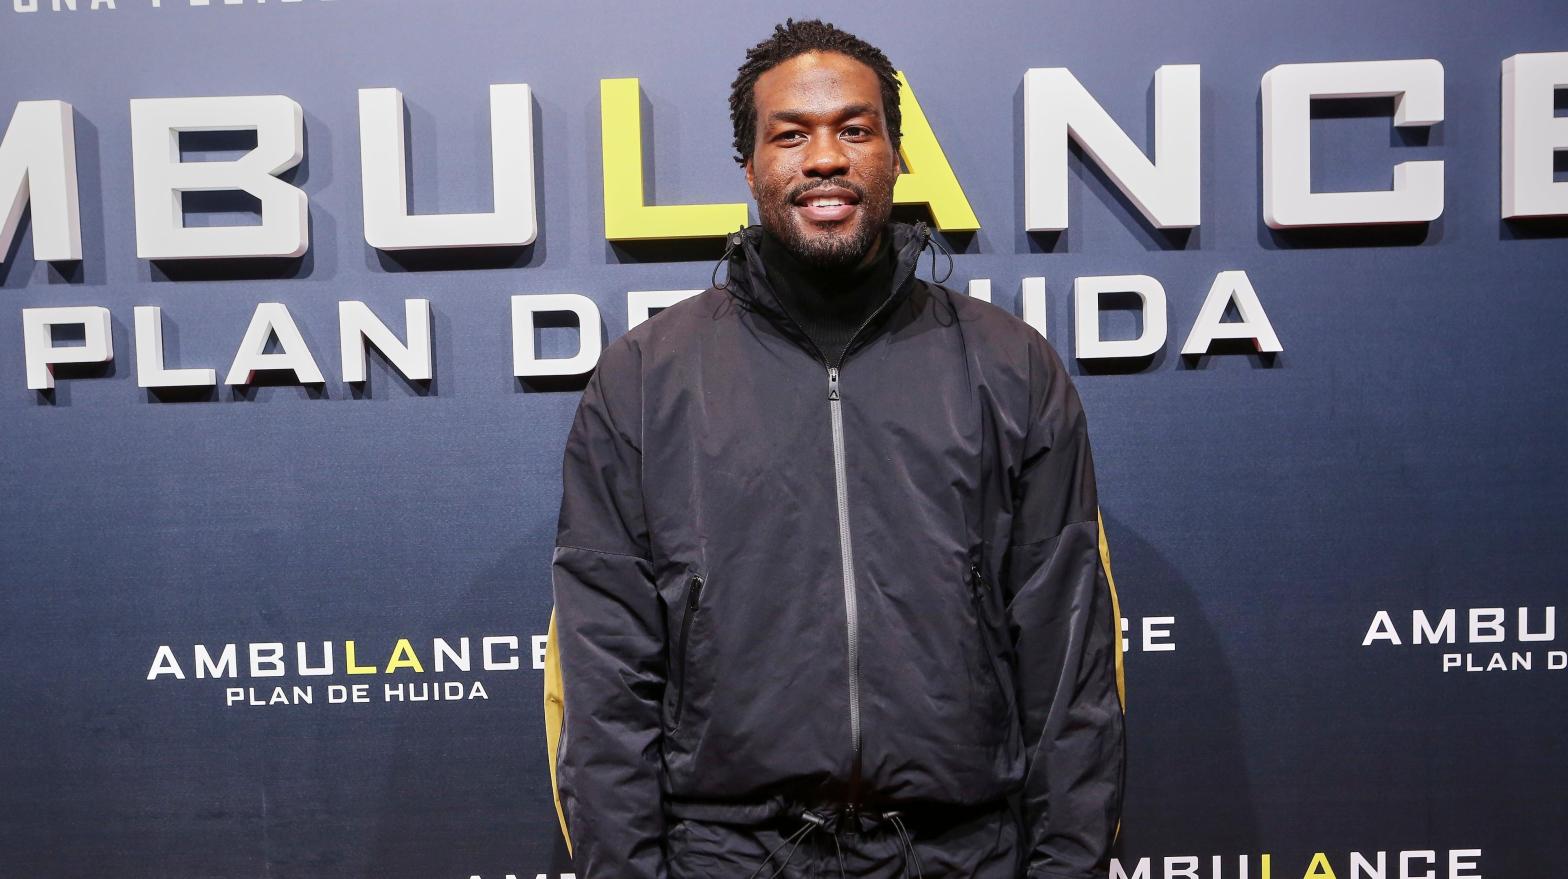 Yahya Abdul-Mateen II attends a screening of Ambulance on March 24, 2022 in Madrid, Spain. (Photo: Pablo Cuadra/Getty Images for Universal Pictures, Getty Images)